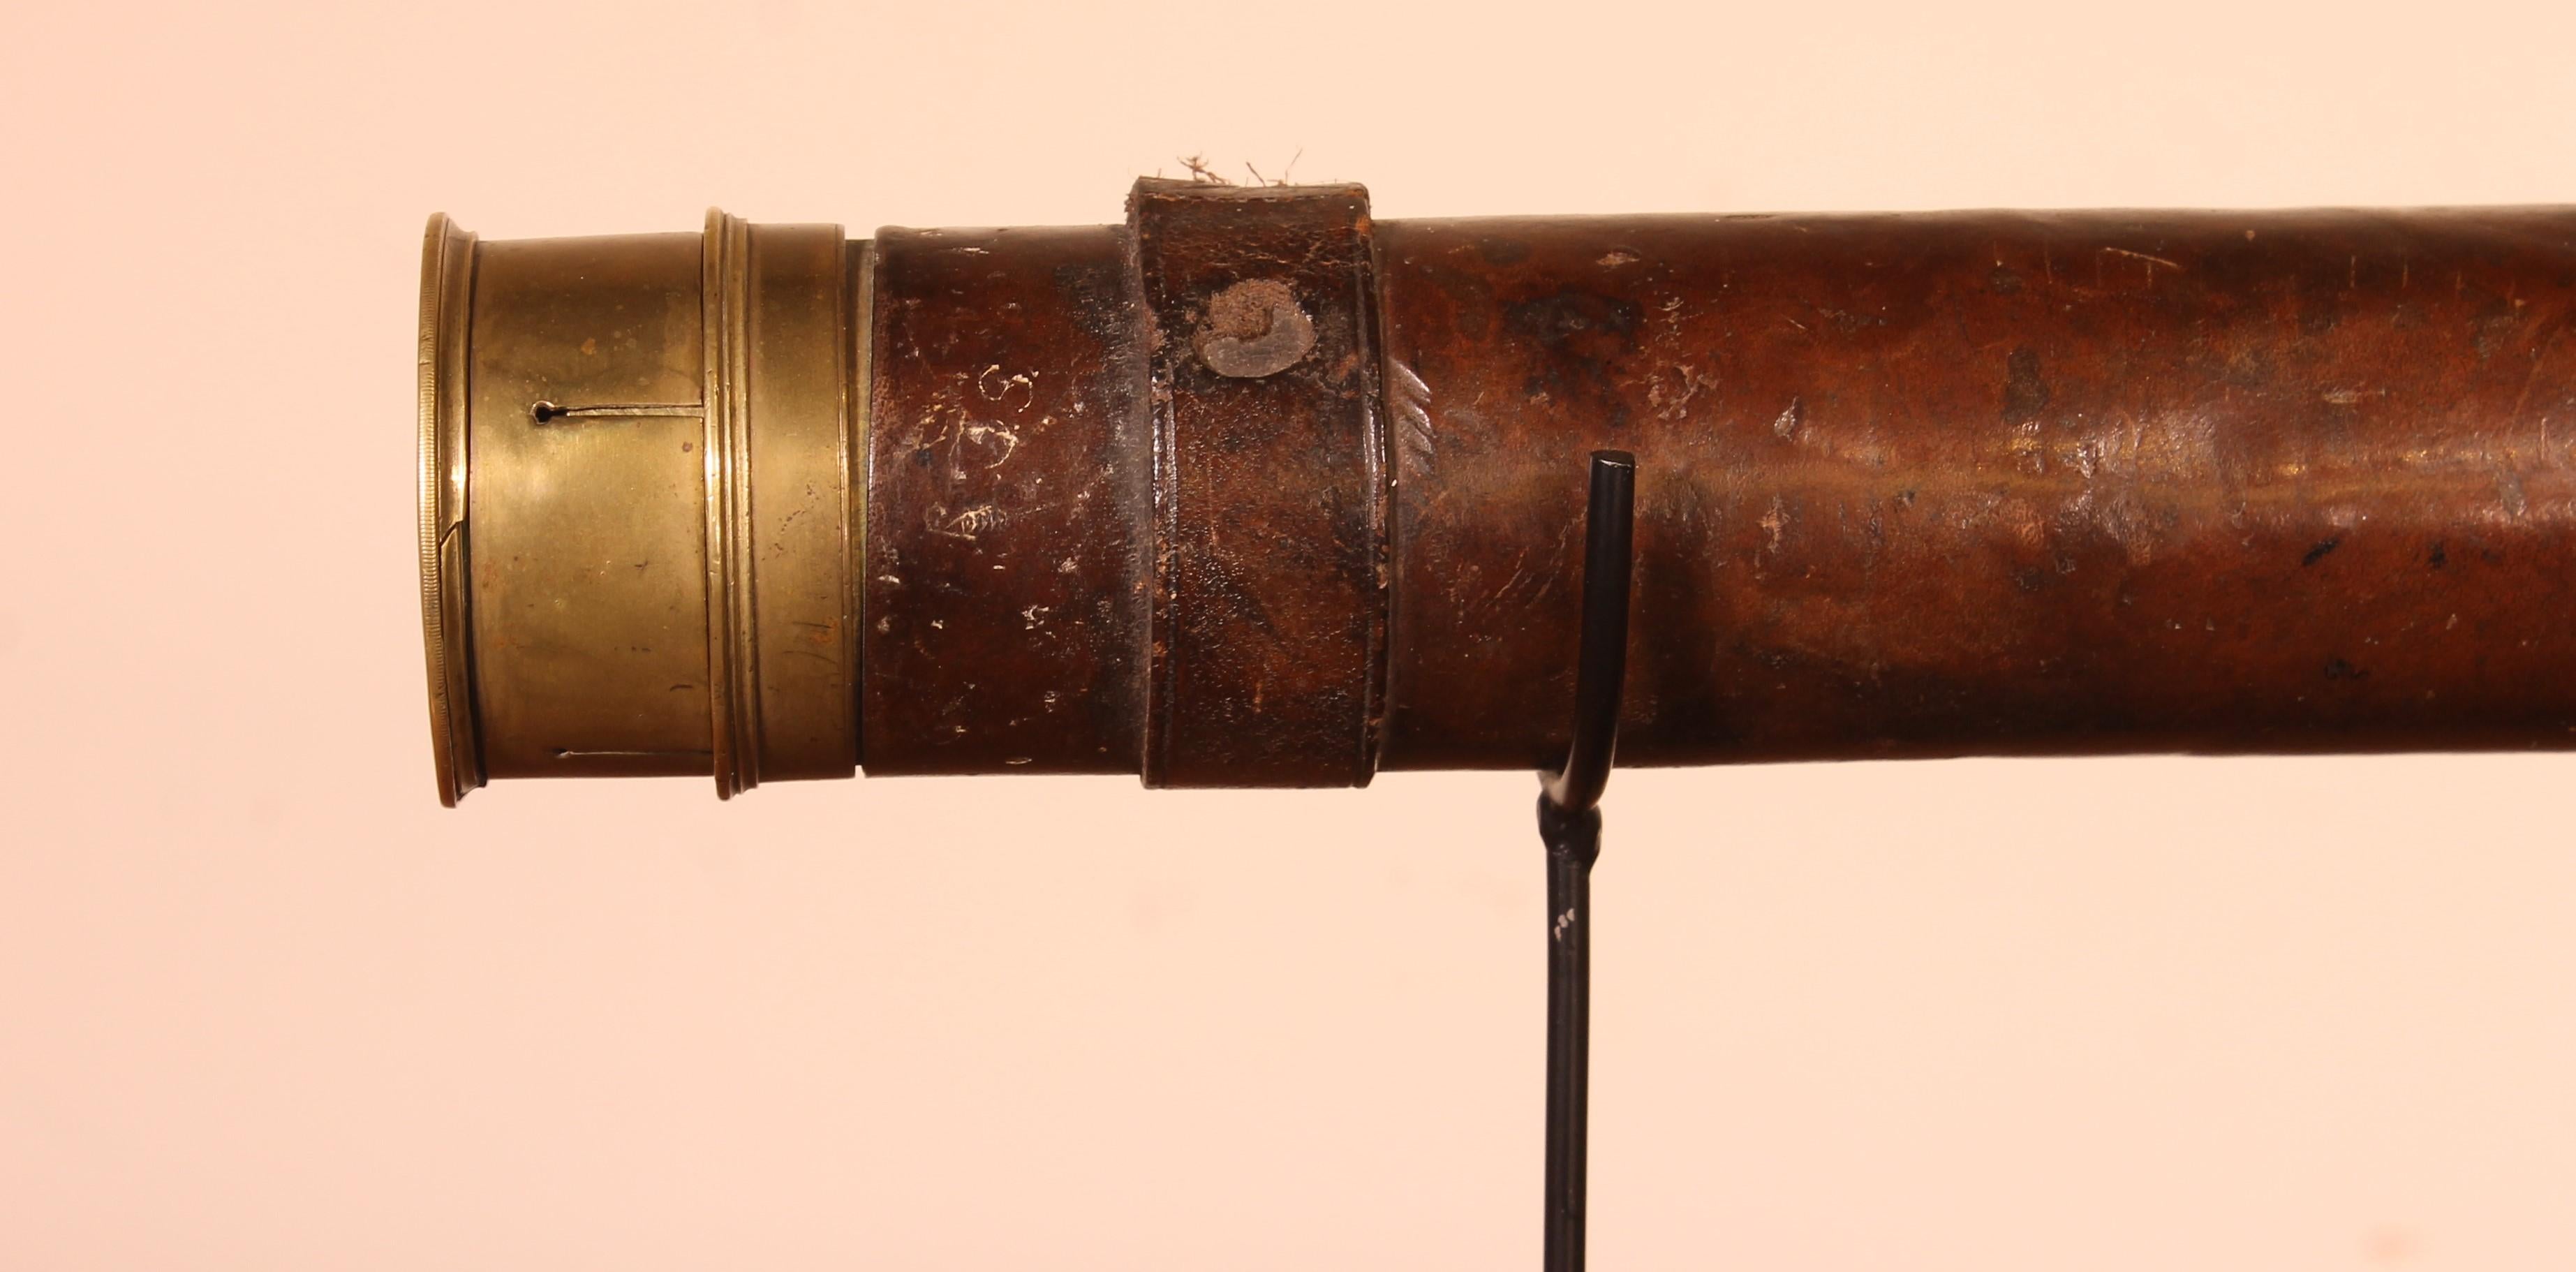 telescope from the English army of the 19th century engraved Military in brass and leather
telescope with 3 draws of 63cm deployed
The handle is in leather and of good quality and in superb condition
It's sold with the support to be well